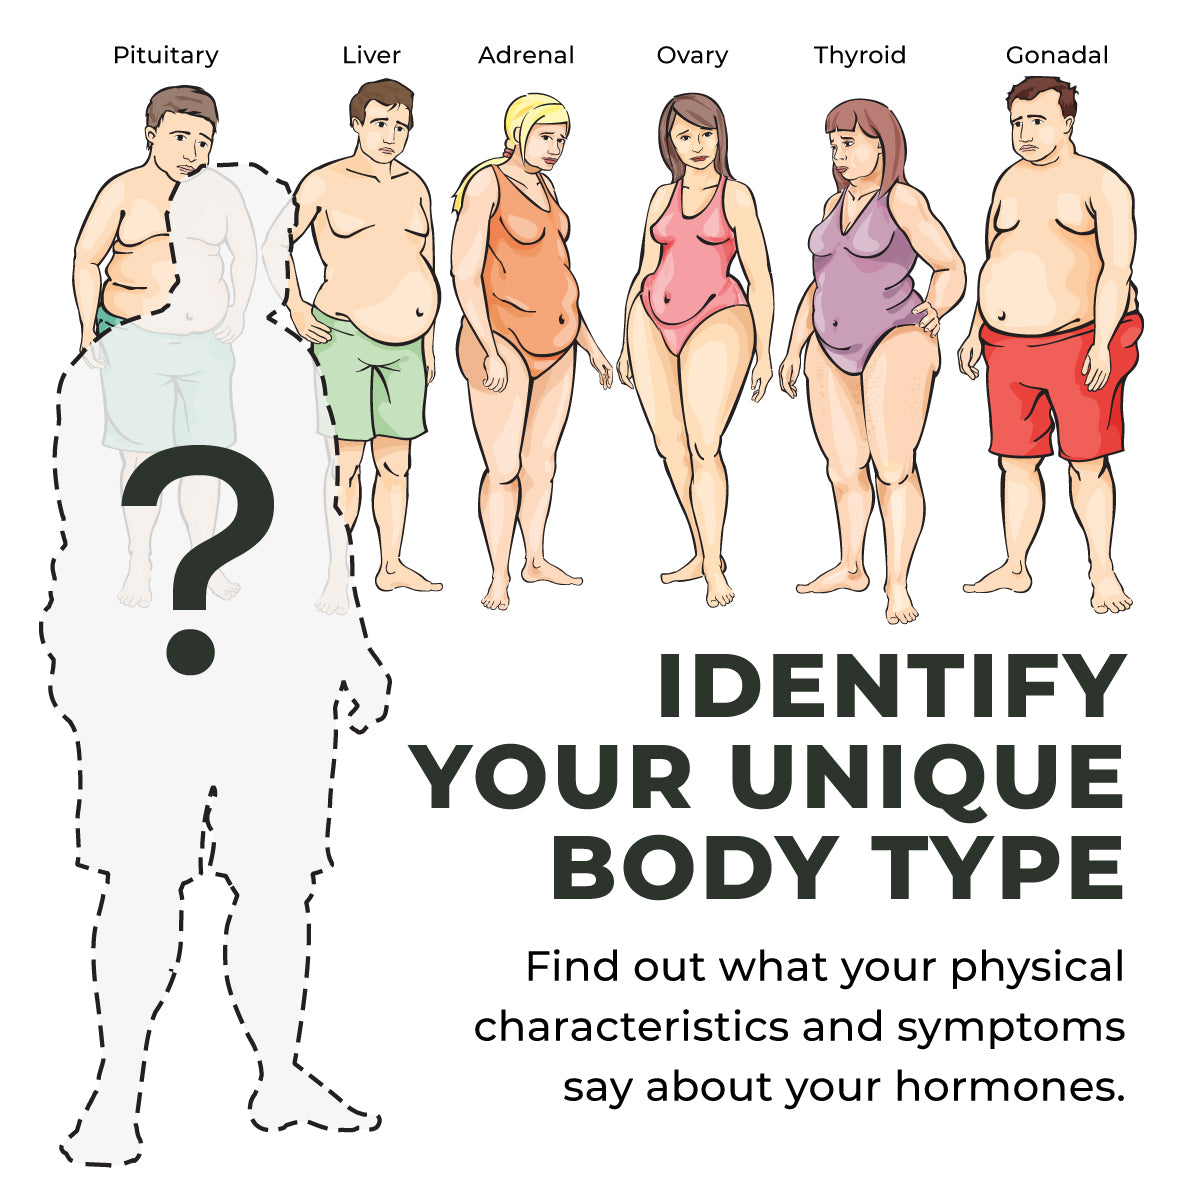 Body Type Overview